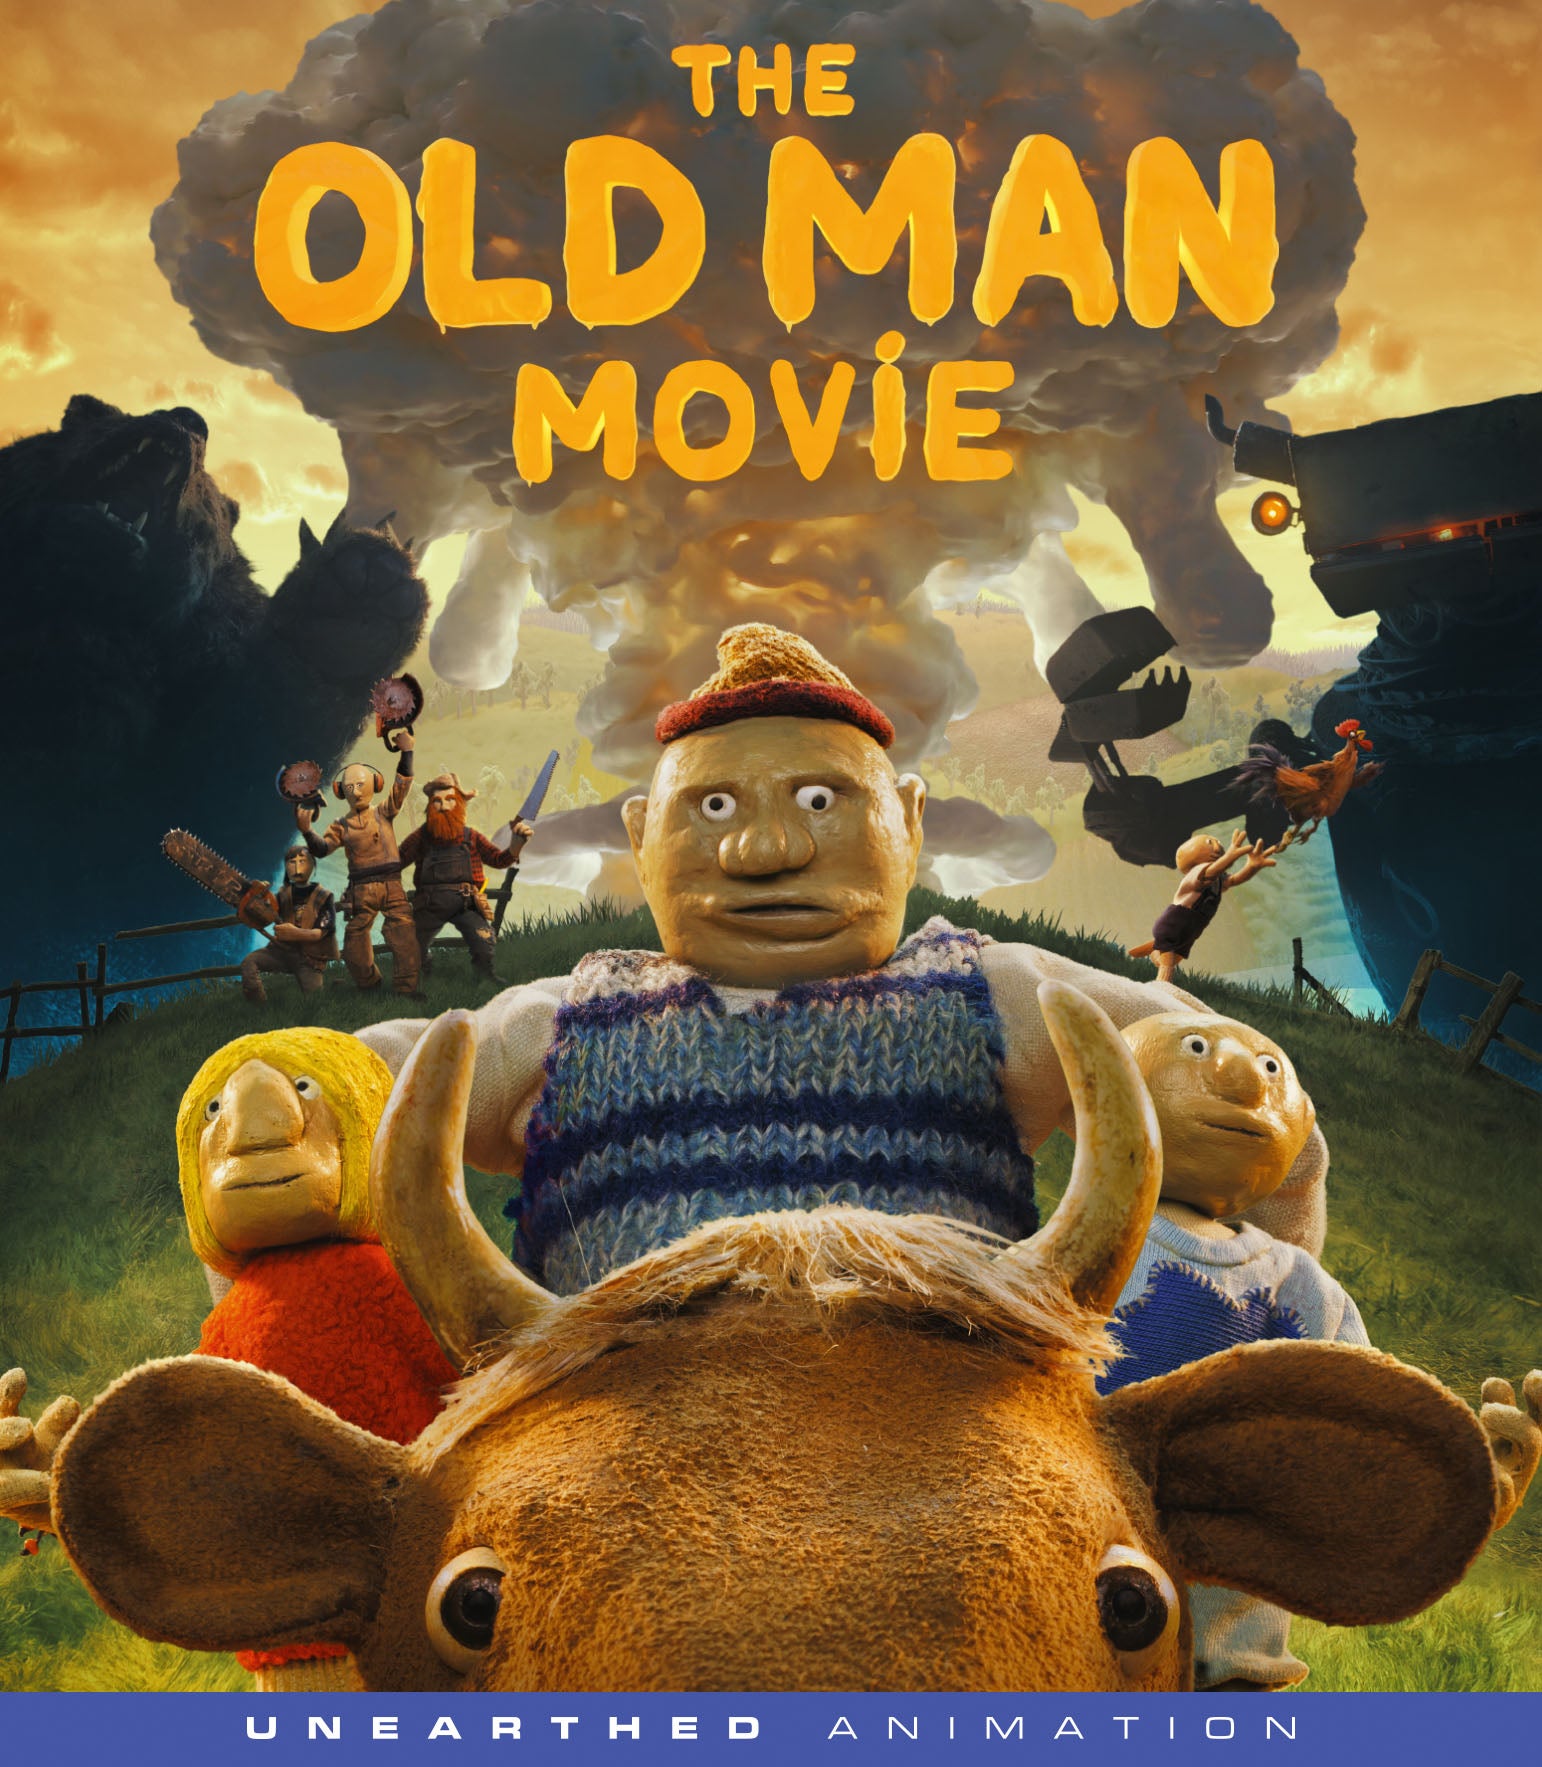 THE OLD MAN MOVIE BLU-RAY